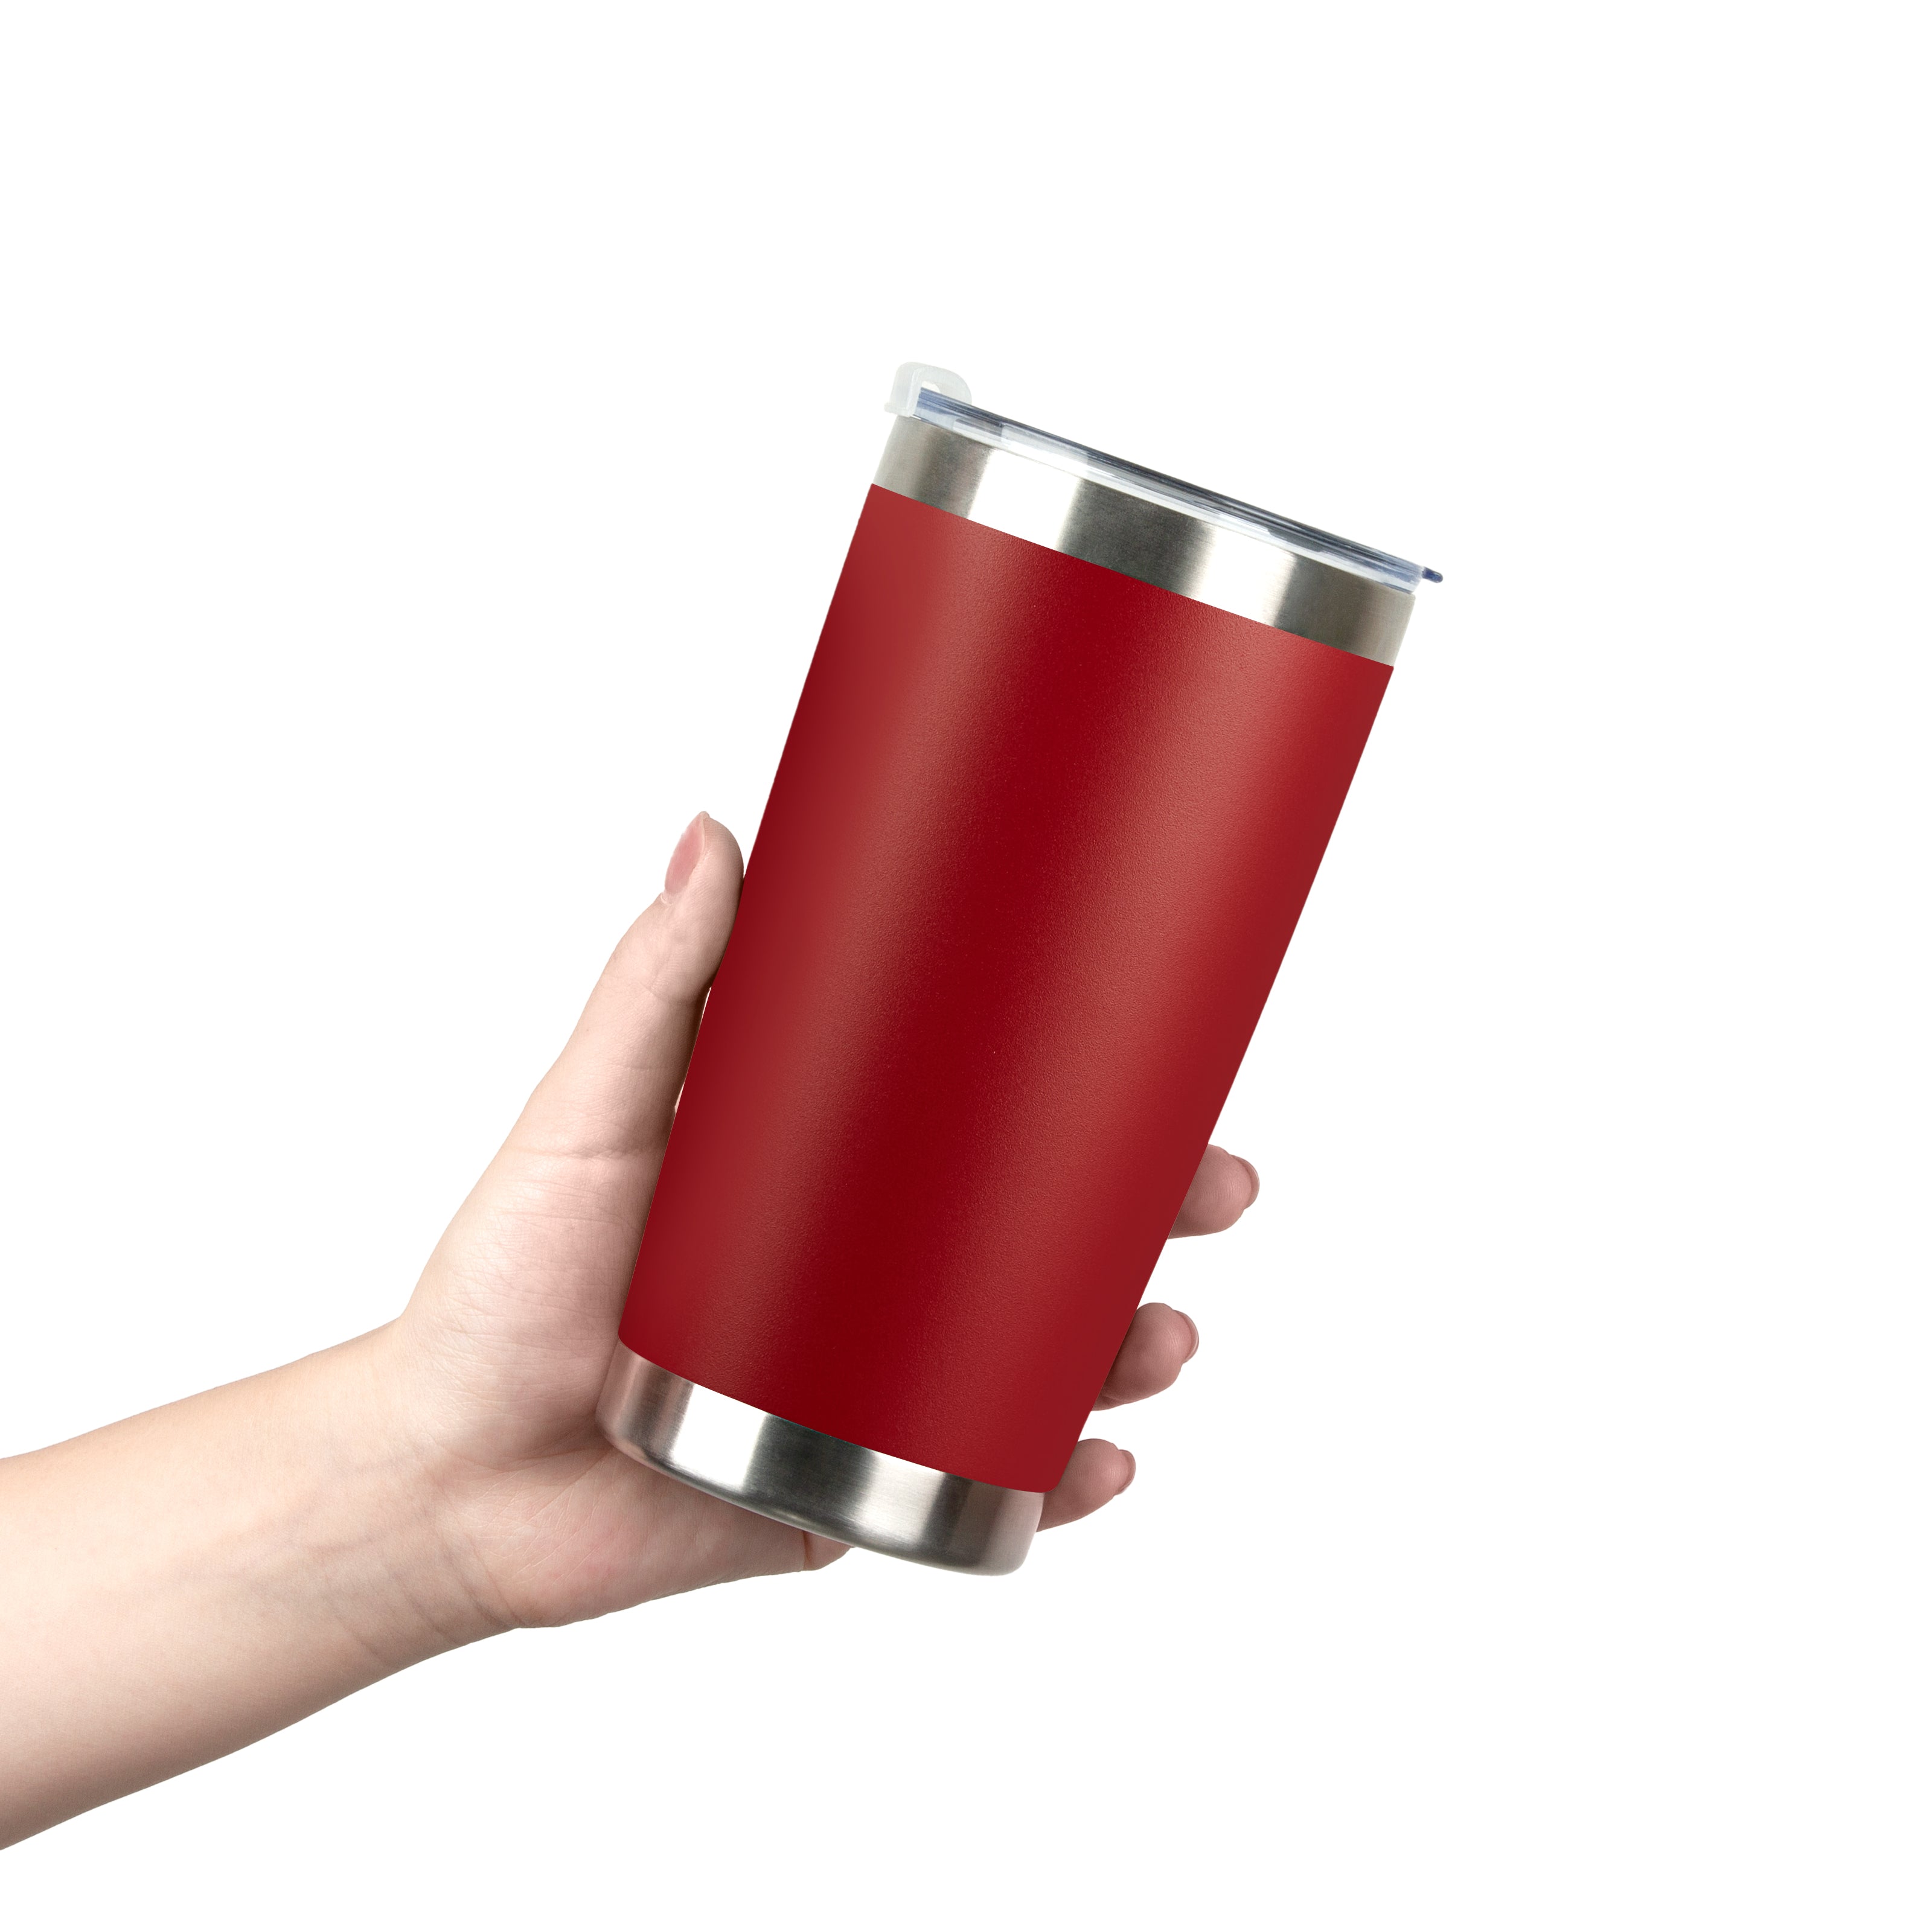 20oz Stainless Steel Coffee Tumbler for Laser Engraving